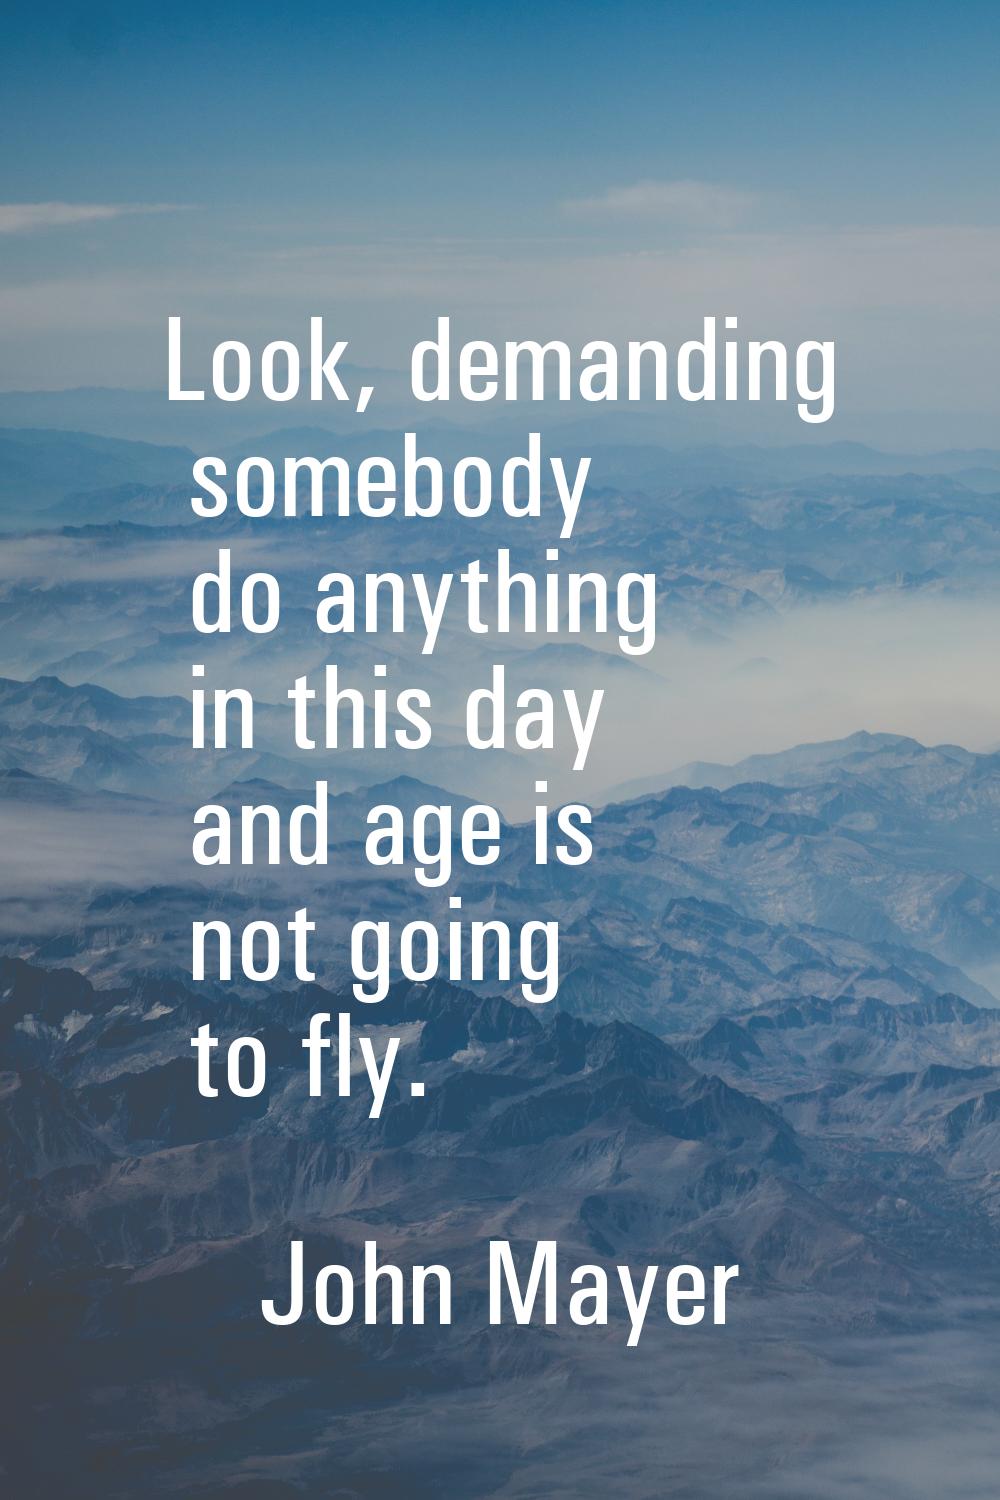 Look, demanding somebody do anything in this day and age is not going to fly.